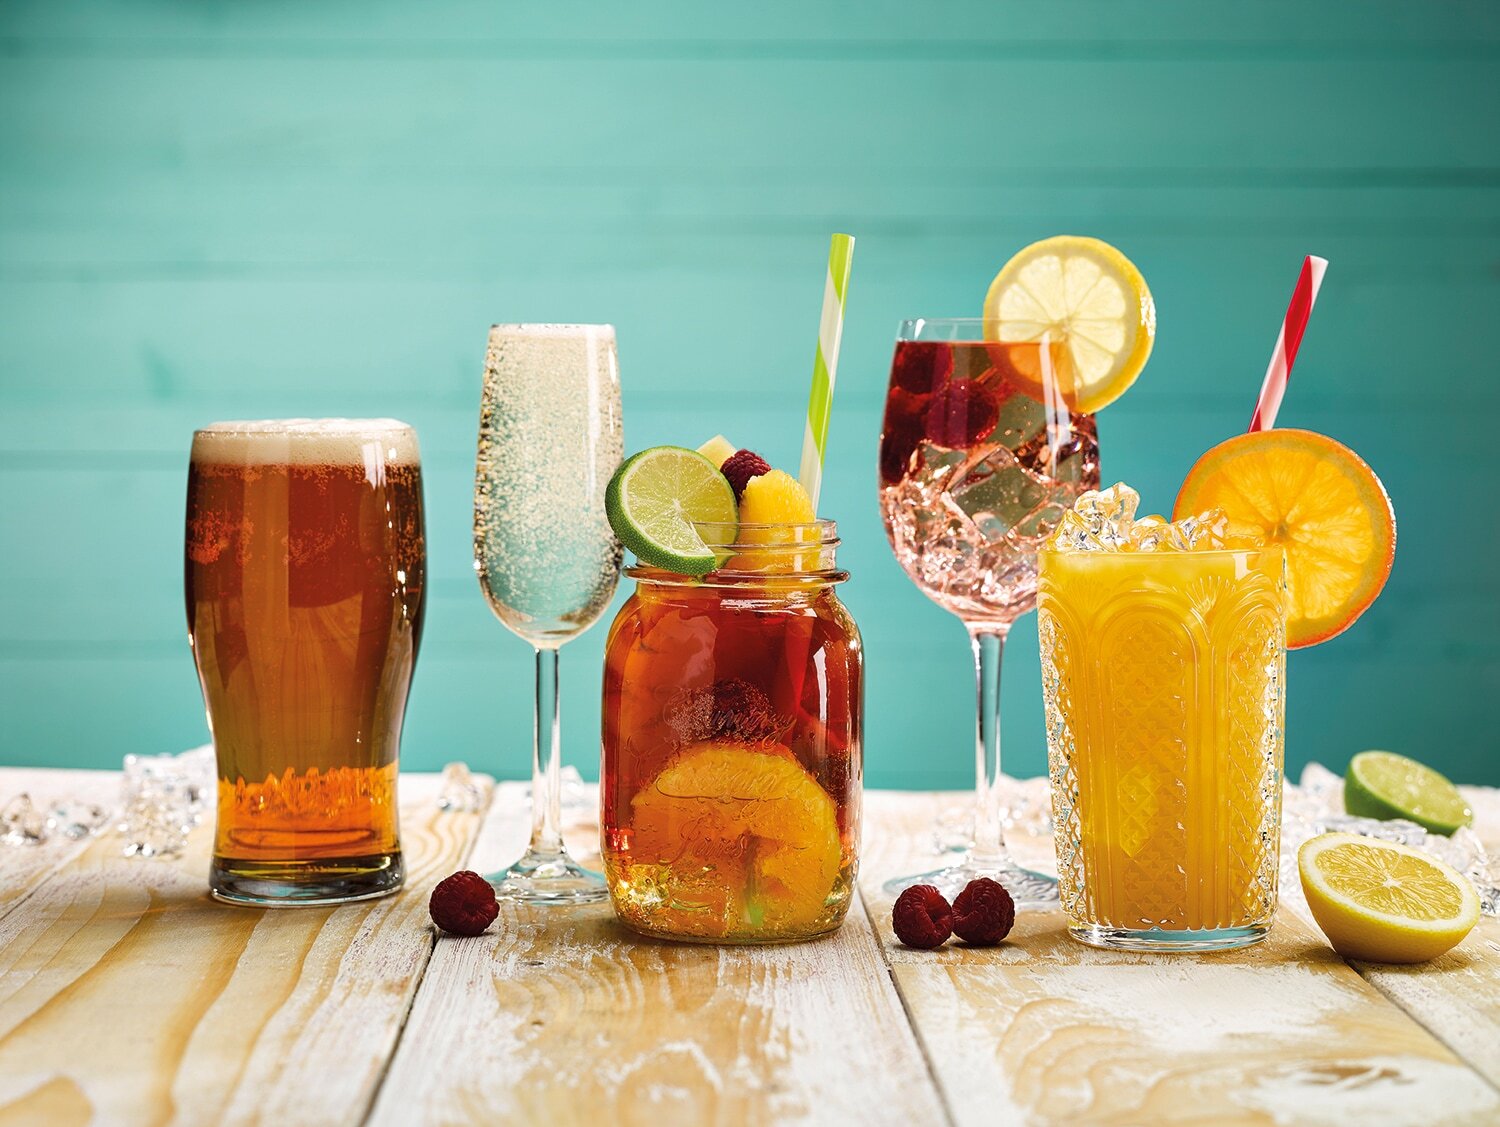 Liquid profits: the drinks fuelling growth and sales